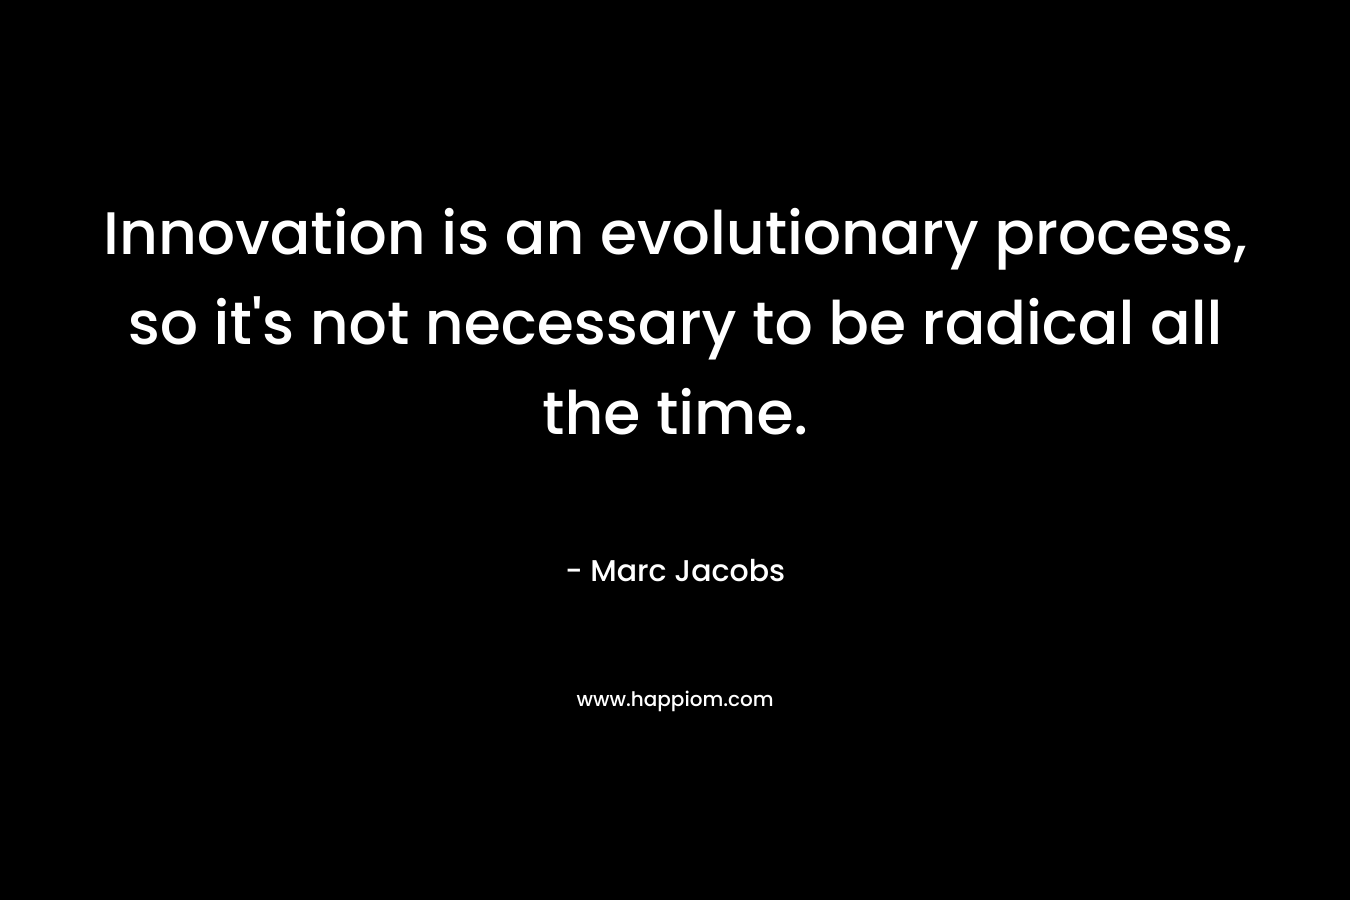 Innovation is an evolutionary process, so it's not necessary to be radical all the time.